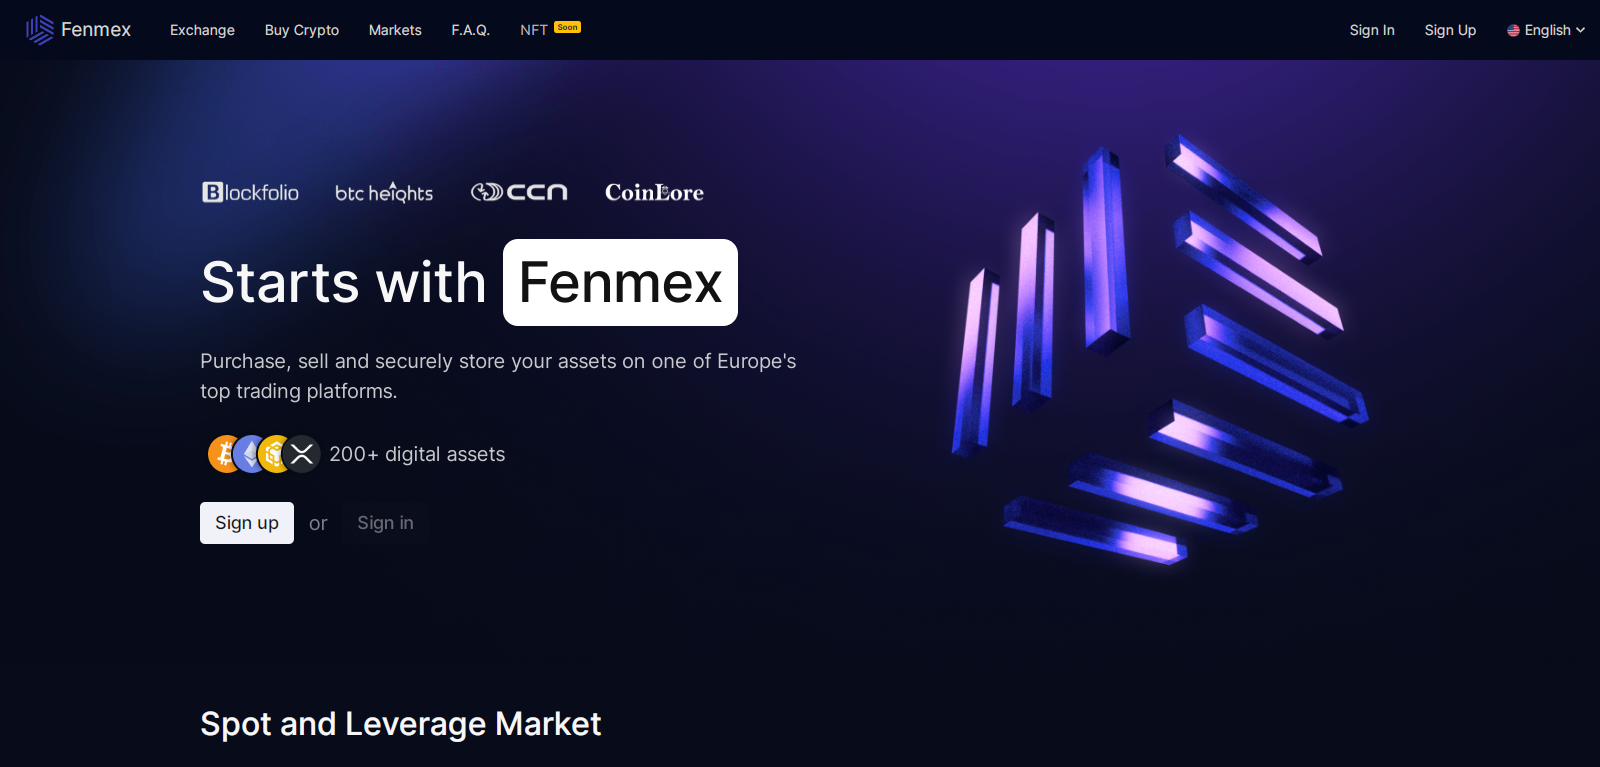 Investers Beware Of Fenmex.com Crypto Trading Platform!! It’s 100% Scam!